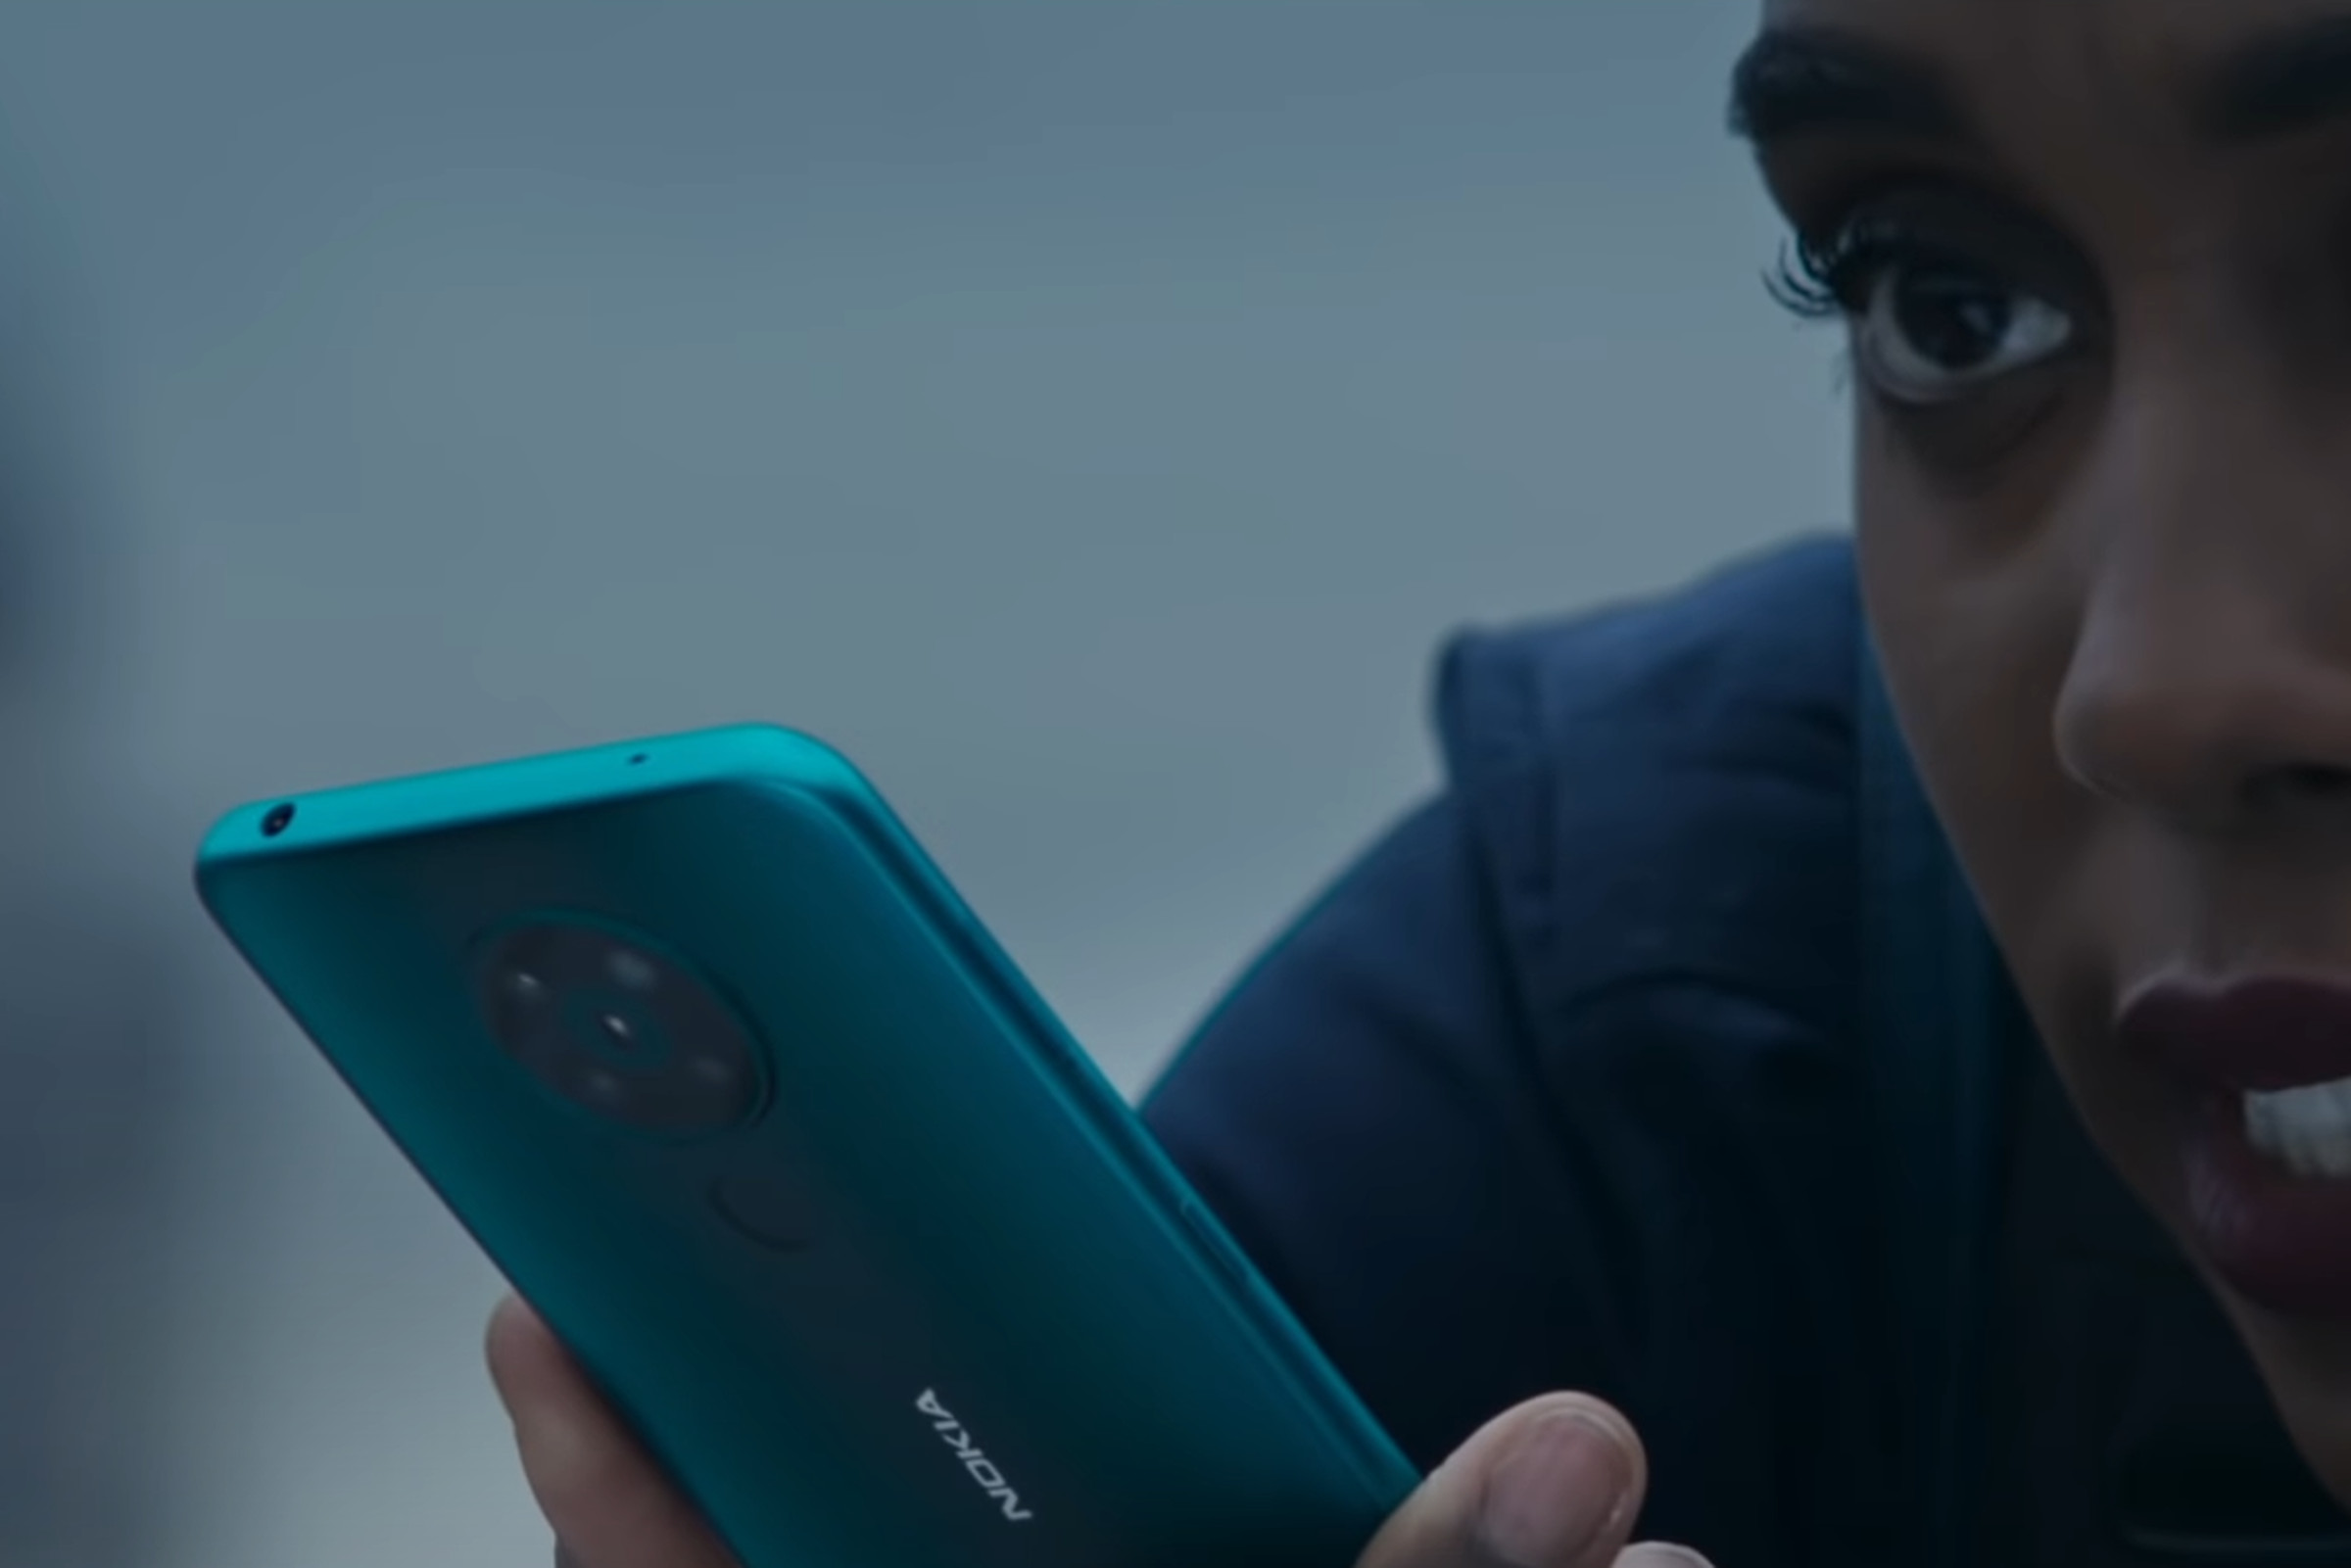 An ad released in March 2020 appears to show a Nokia 5.3 with a rear-mounted fingerprint sensor.